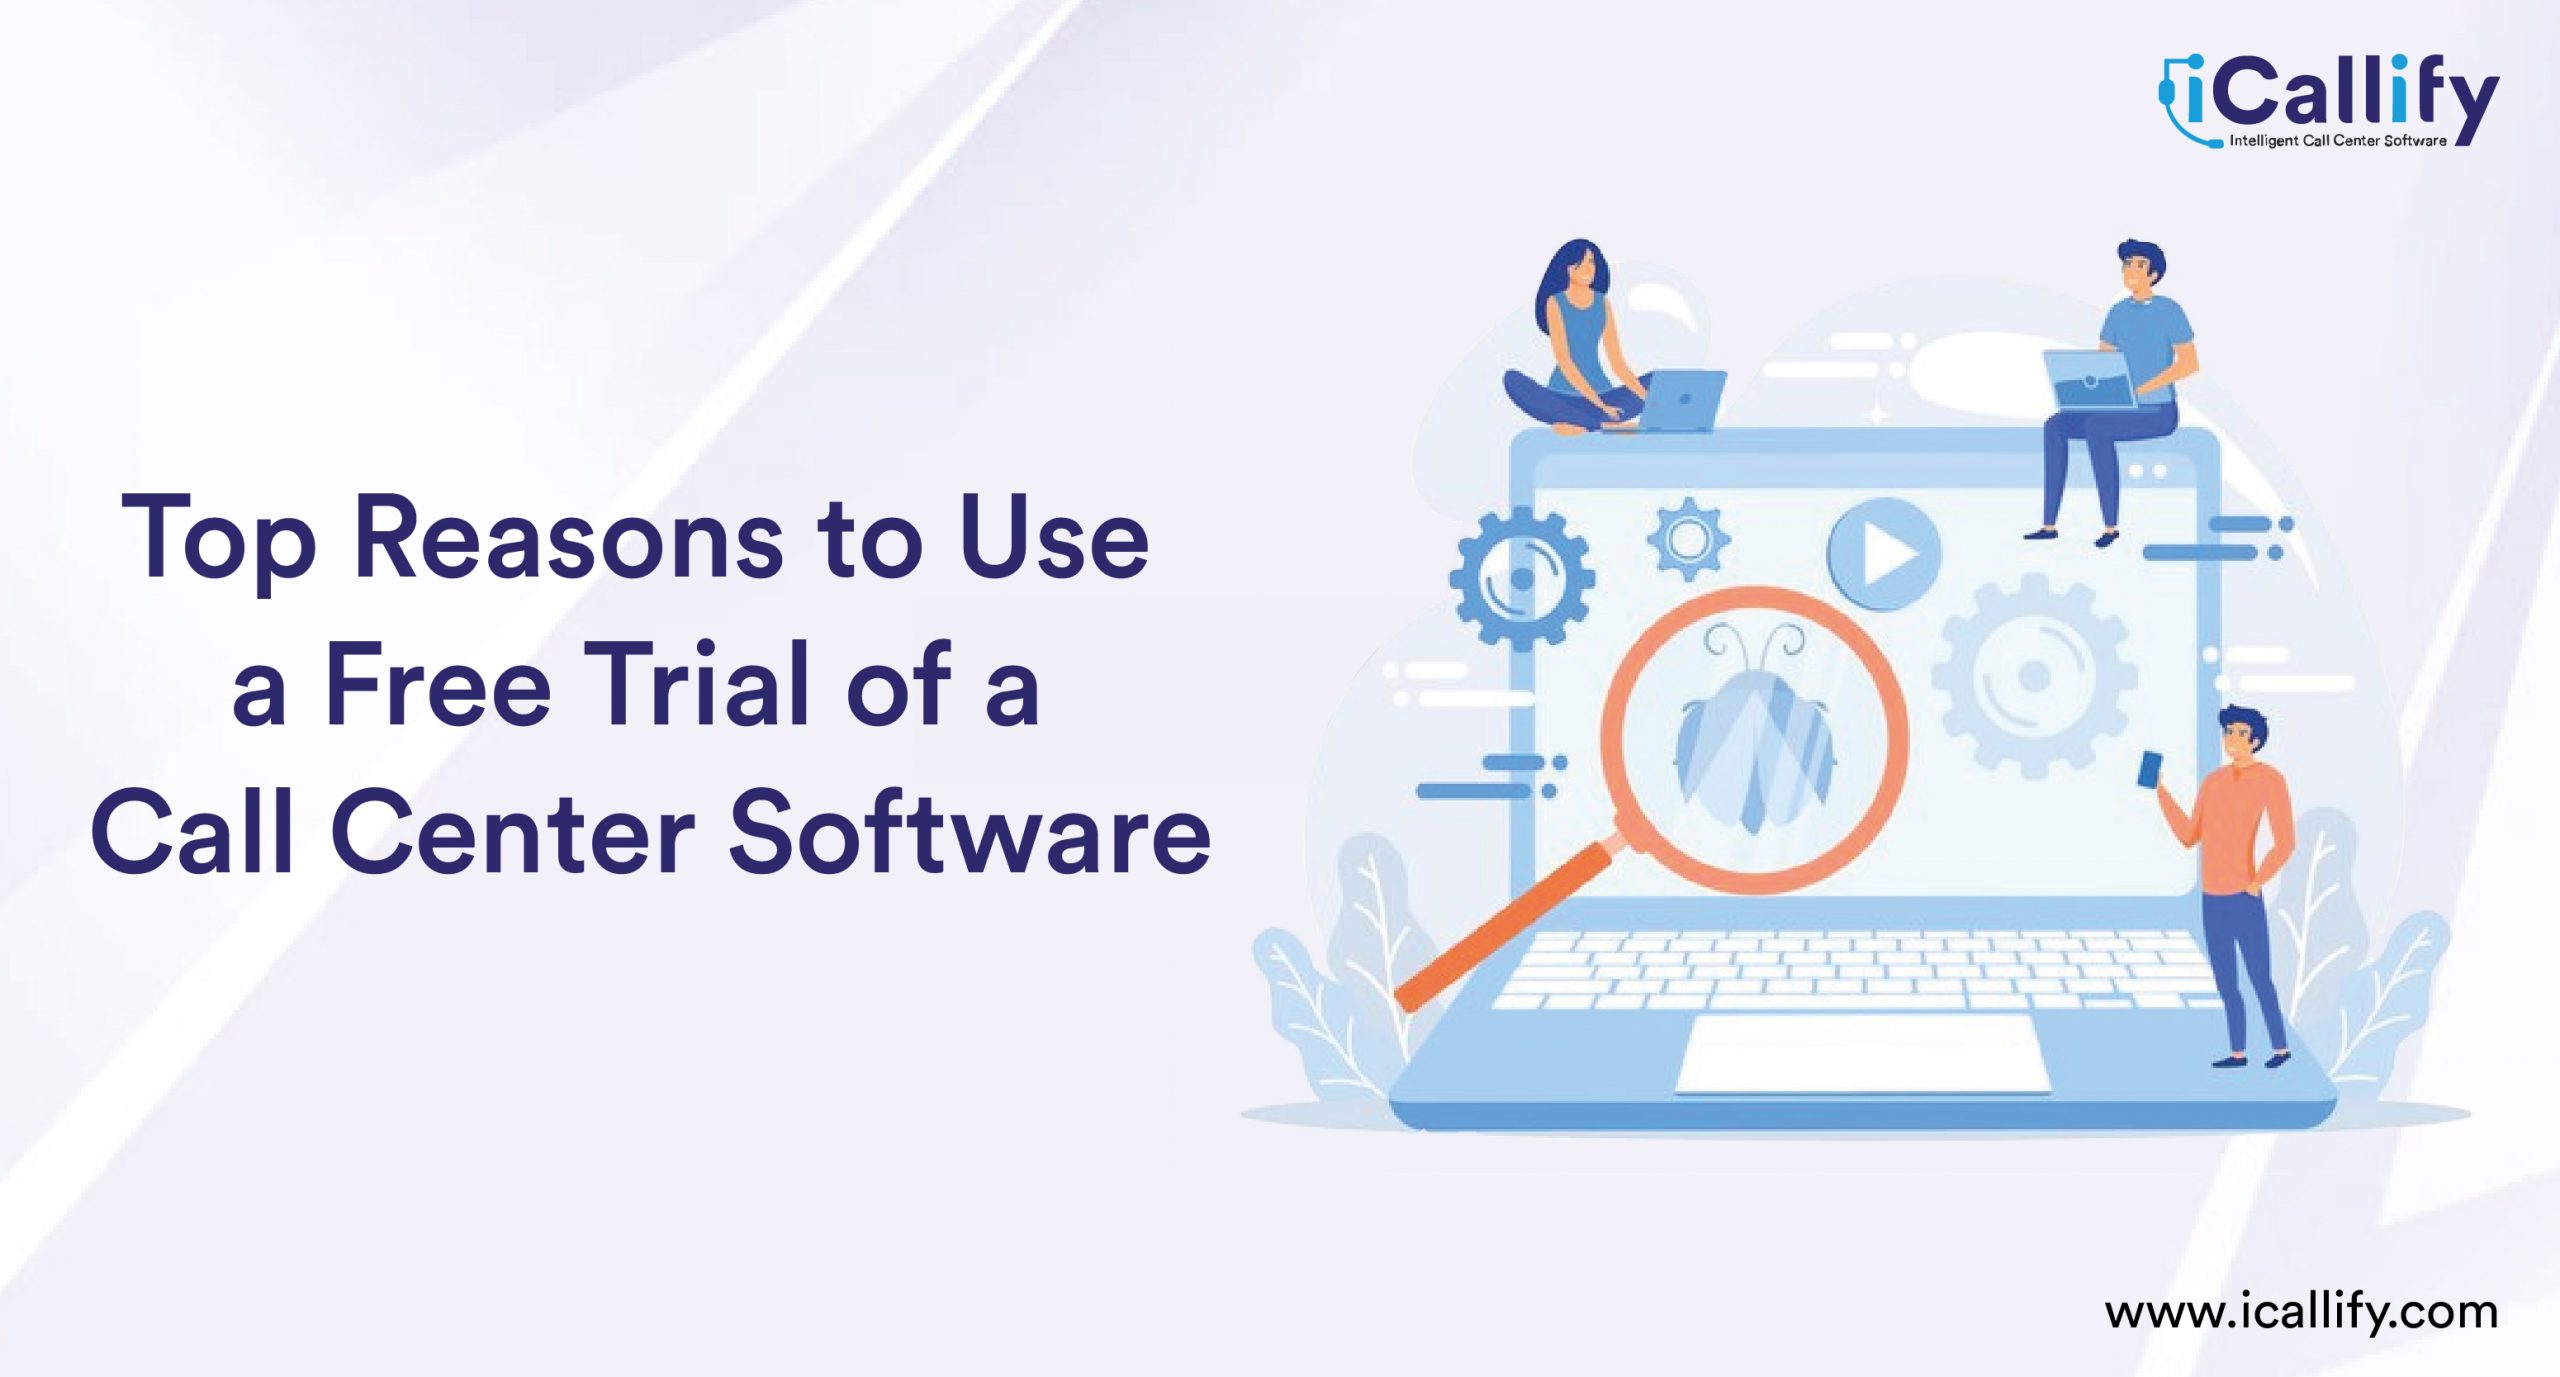 Top Reasons to Use a Free Trial of a Call Center Software 